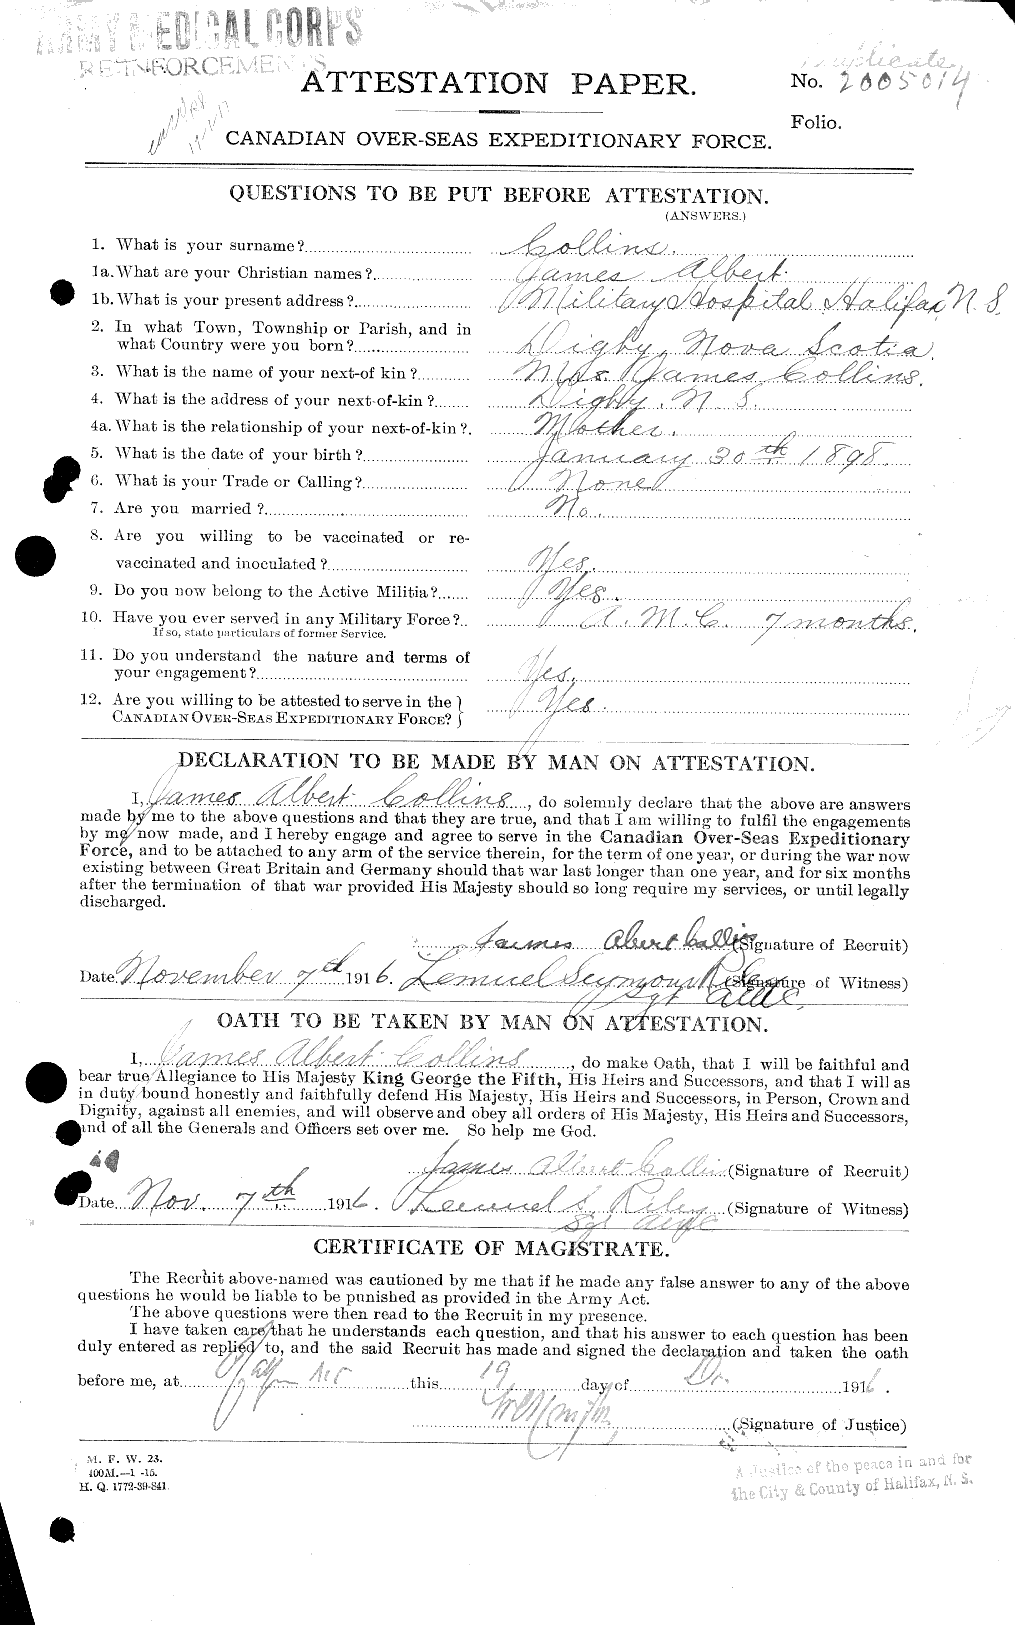 Personnel Records of the First World War - CEF 037925a